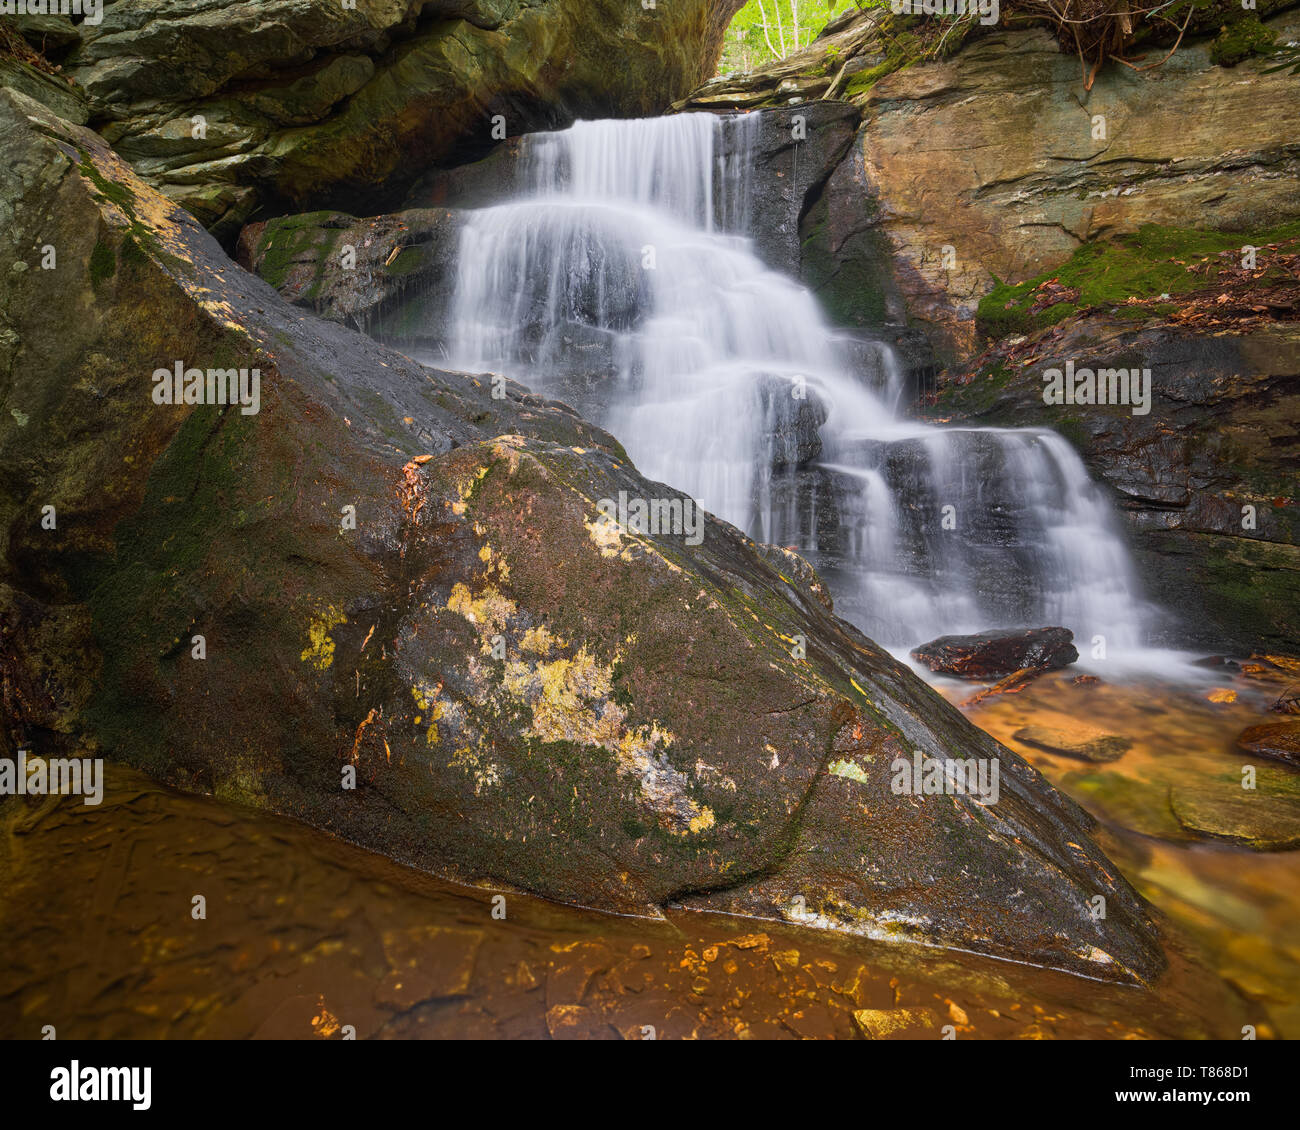 Base of Upper Cascade waterfall in Hanging Rock State Park, North Carolina, Scenic nature landscape photograph. Stock Photo